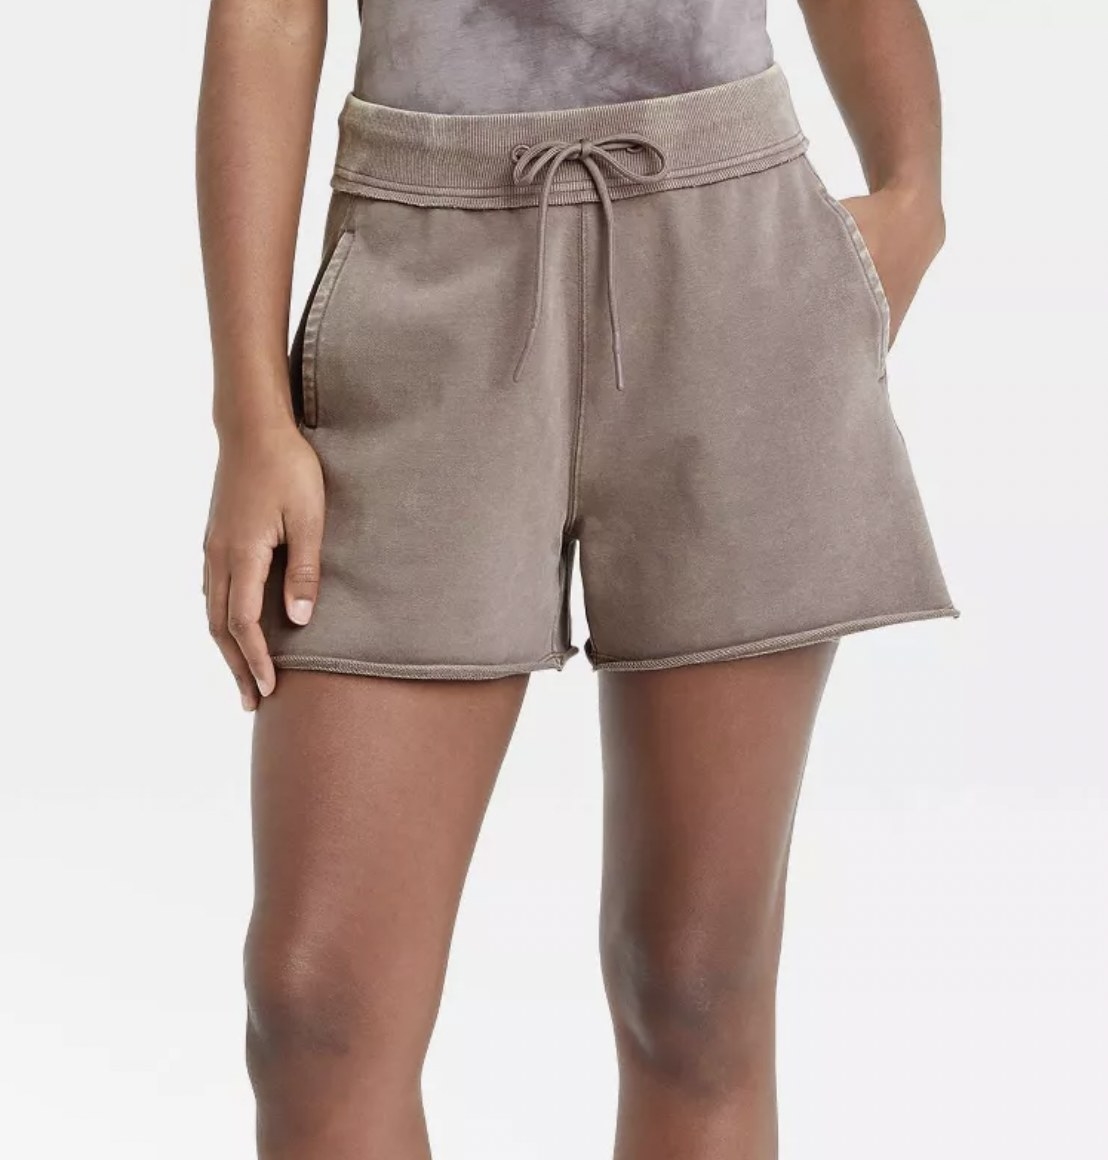 model wearing the shorts in brown